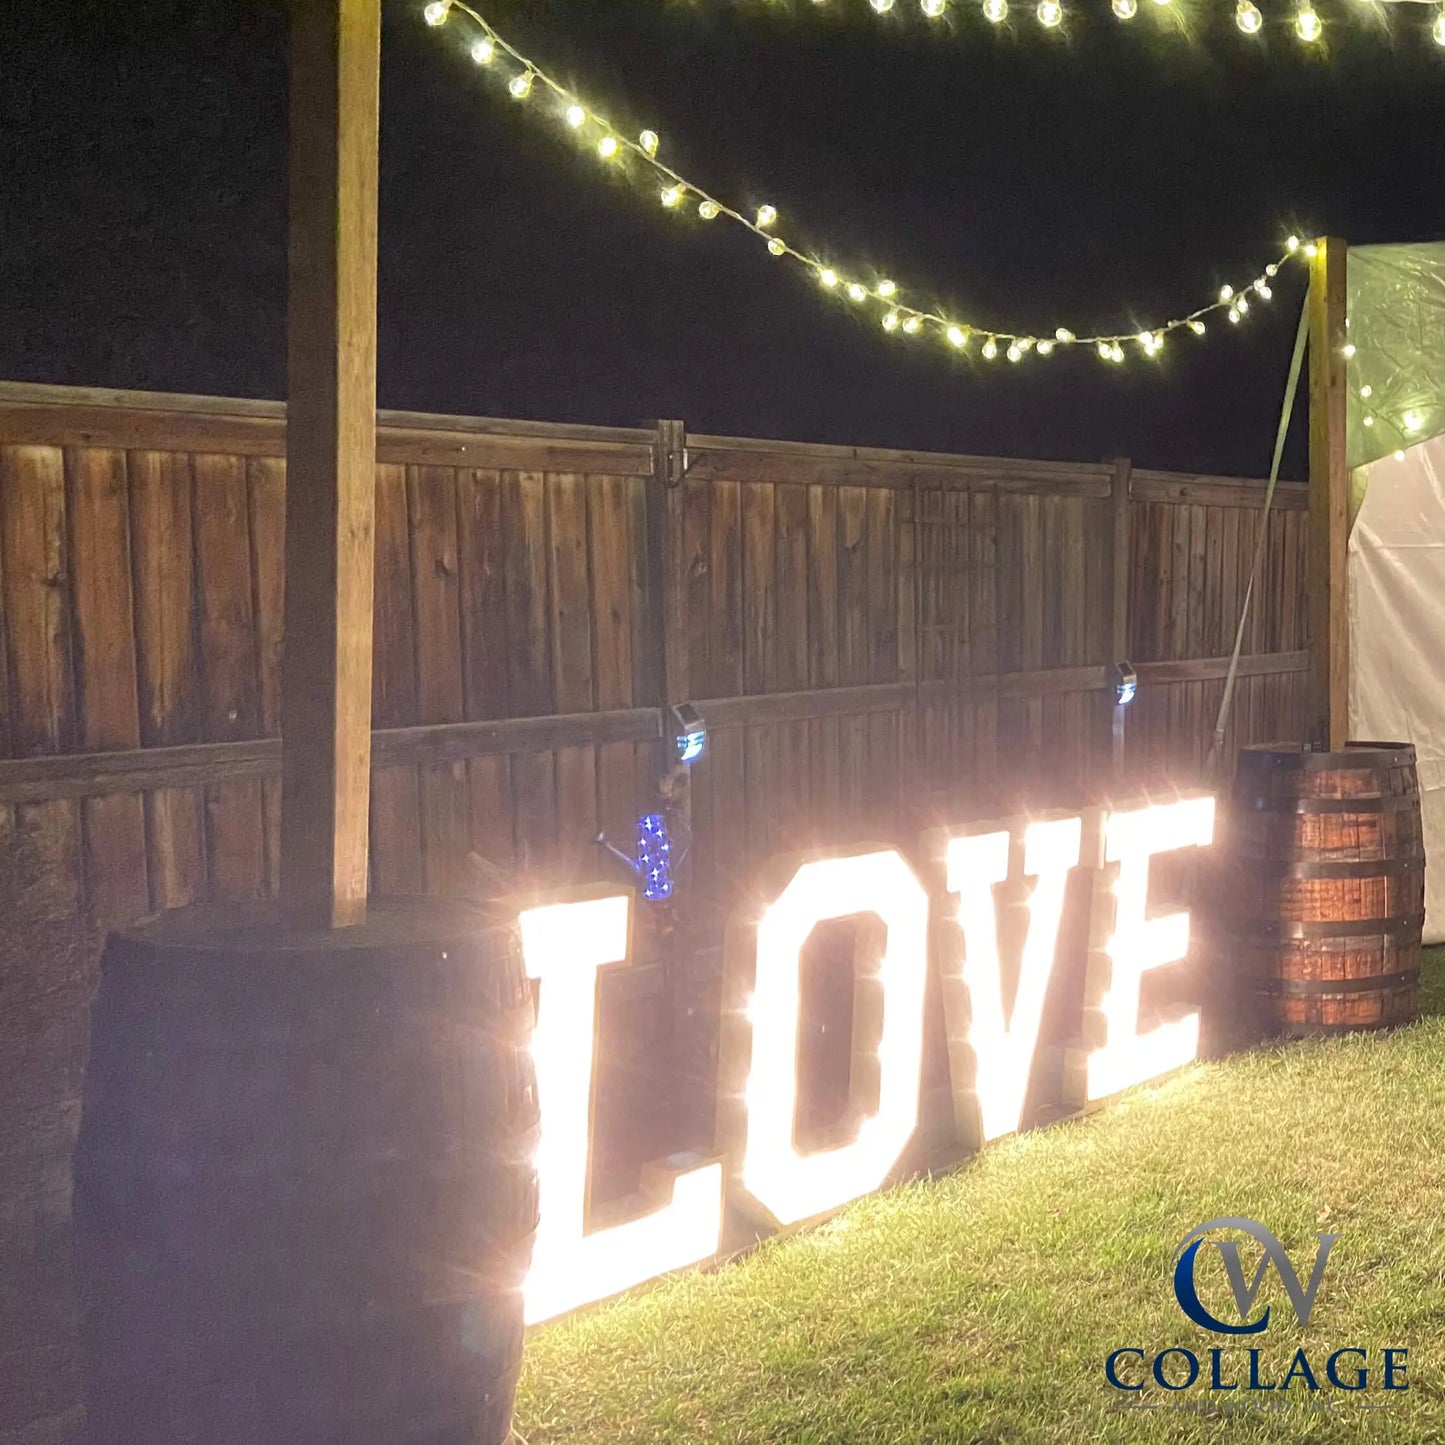 LOVE - Lively wooden marquee spelling LOVE, standing 3 feet tall in a pristine white finish, brilliantly lit by battery-powered LED lights. Perfect for adding a touch of warmth and romance to any setting."